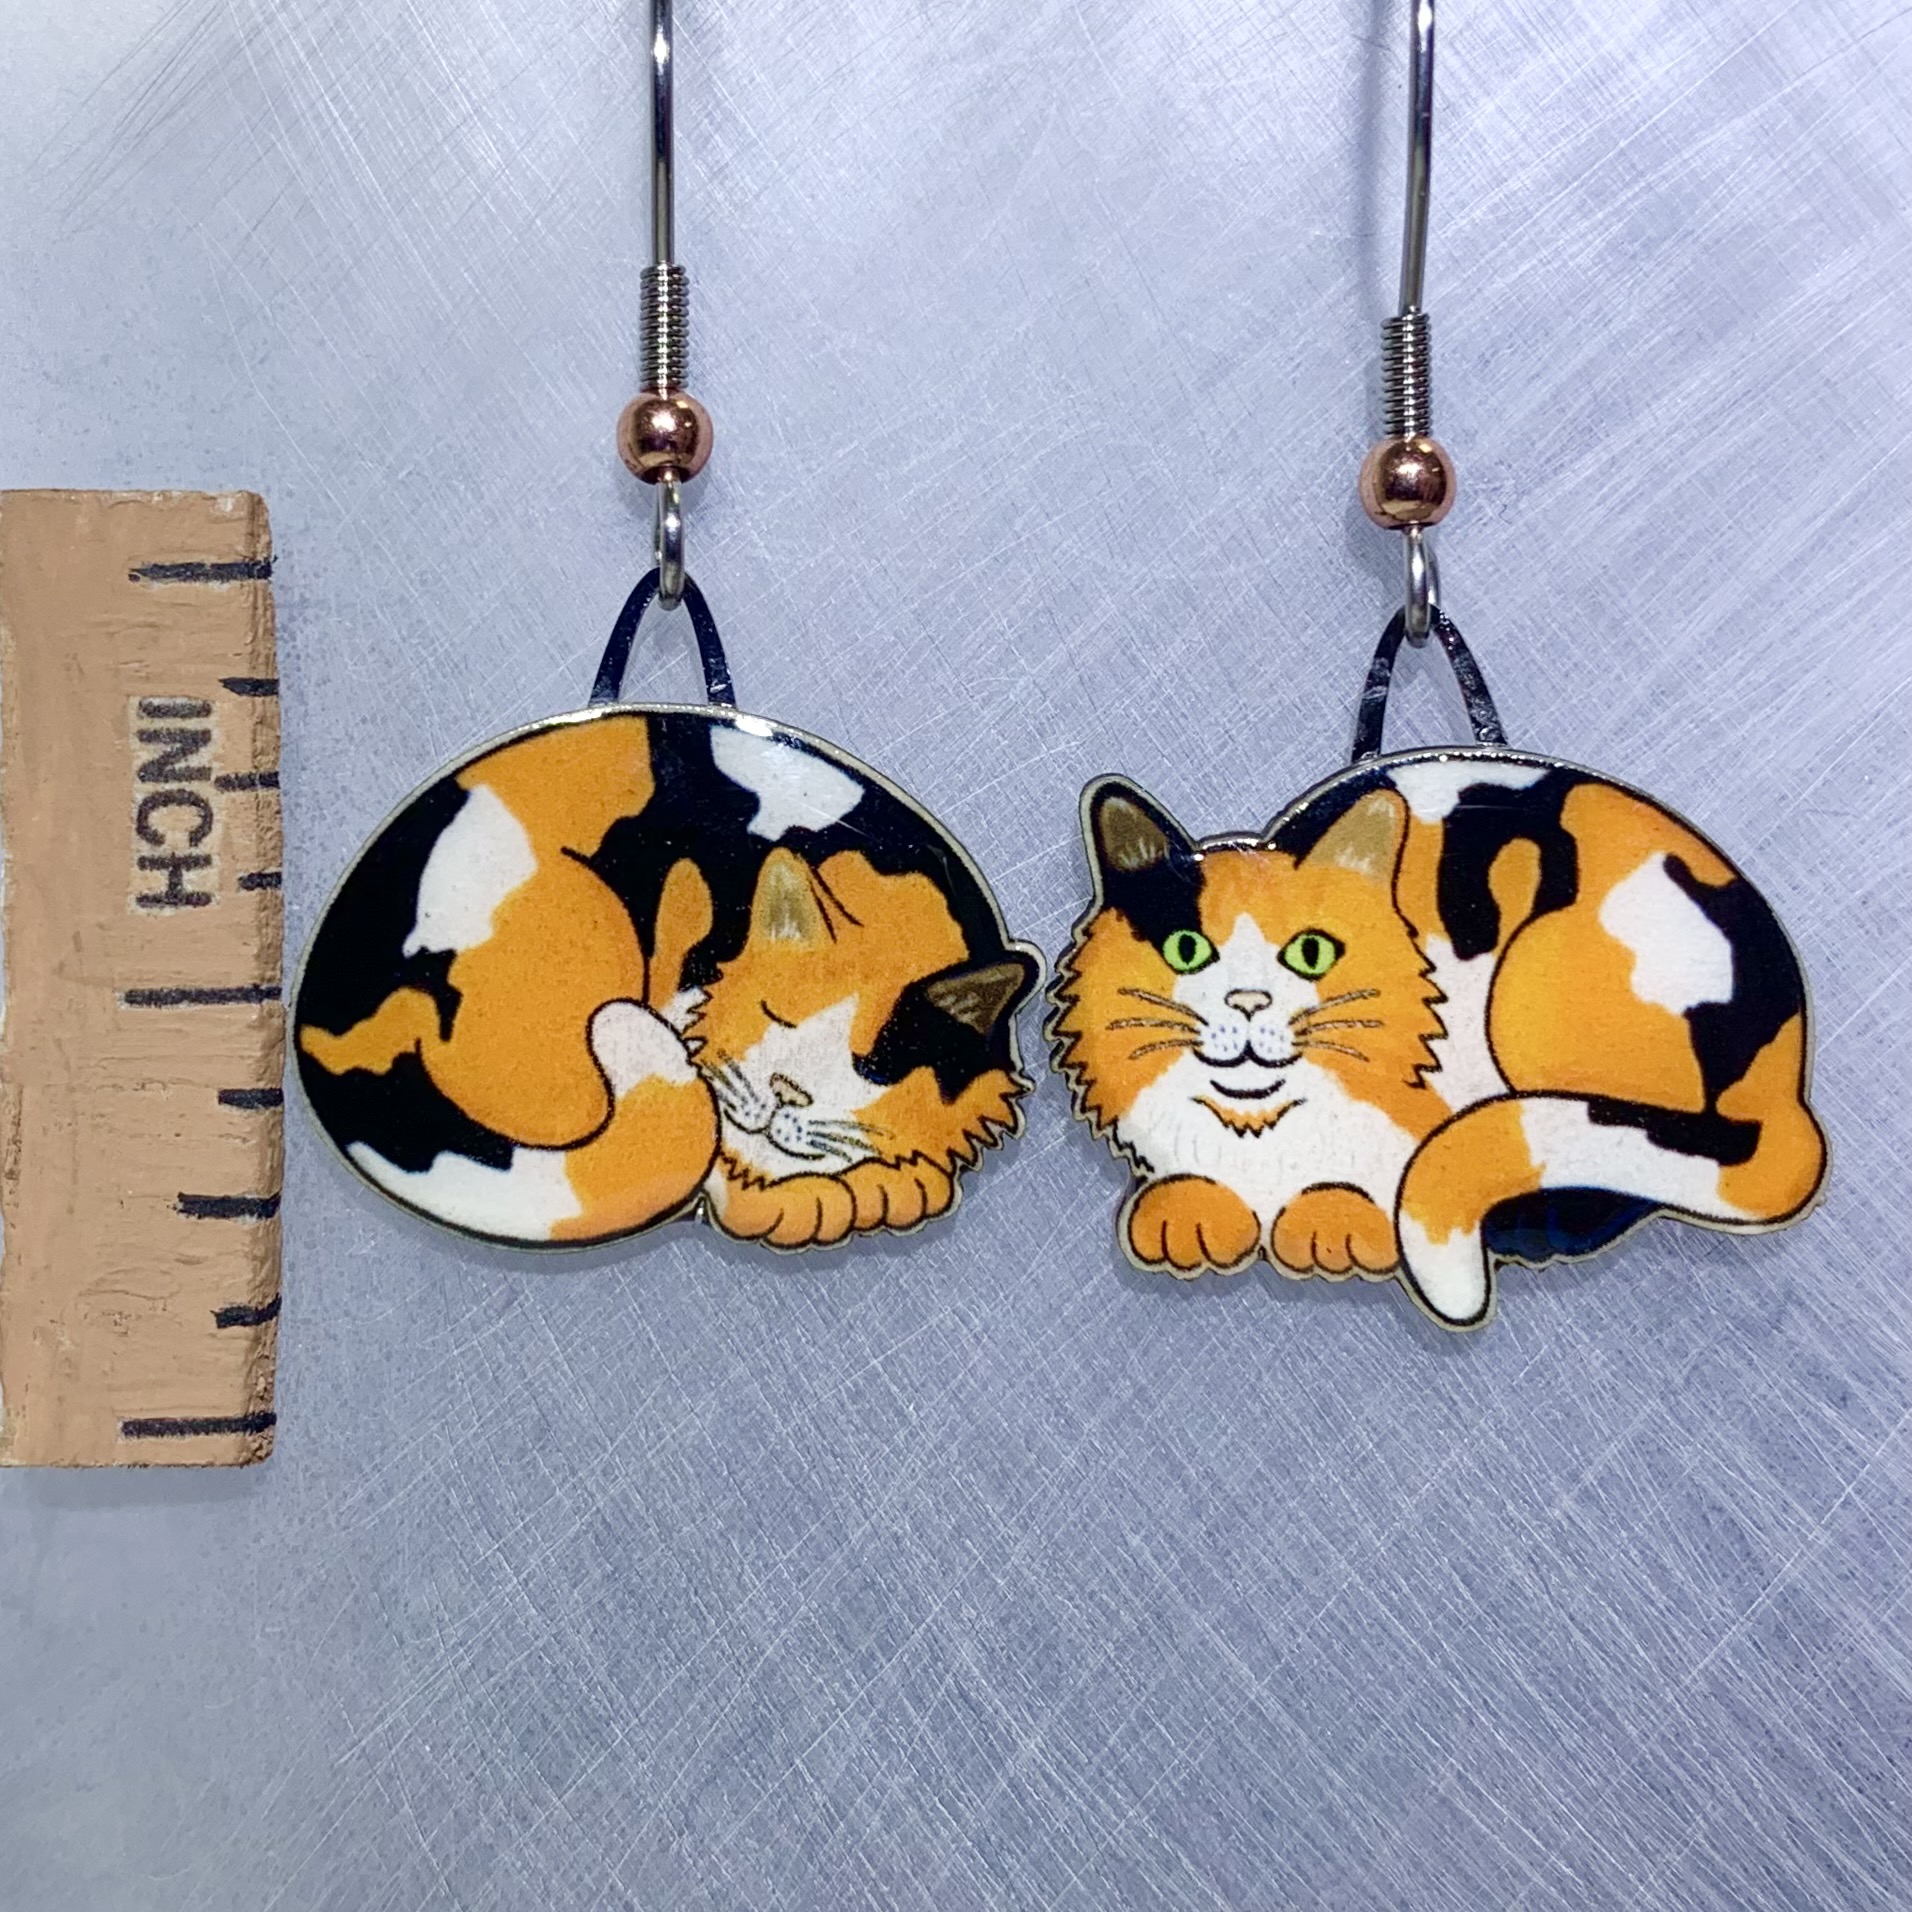 Picture shown is of 1 inch tall pair of earrings of the pet the Calico Napping Cat.